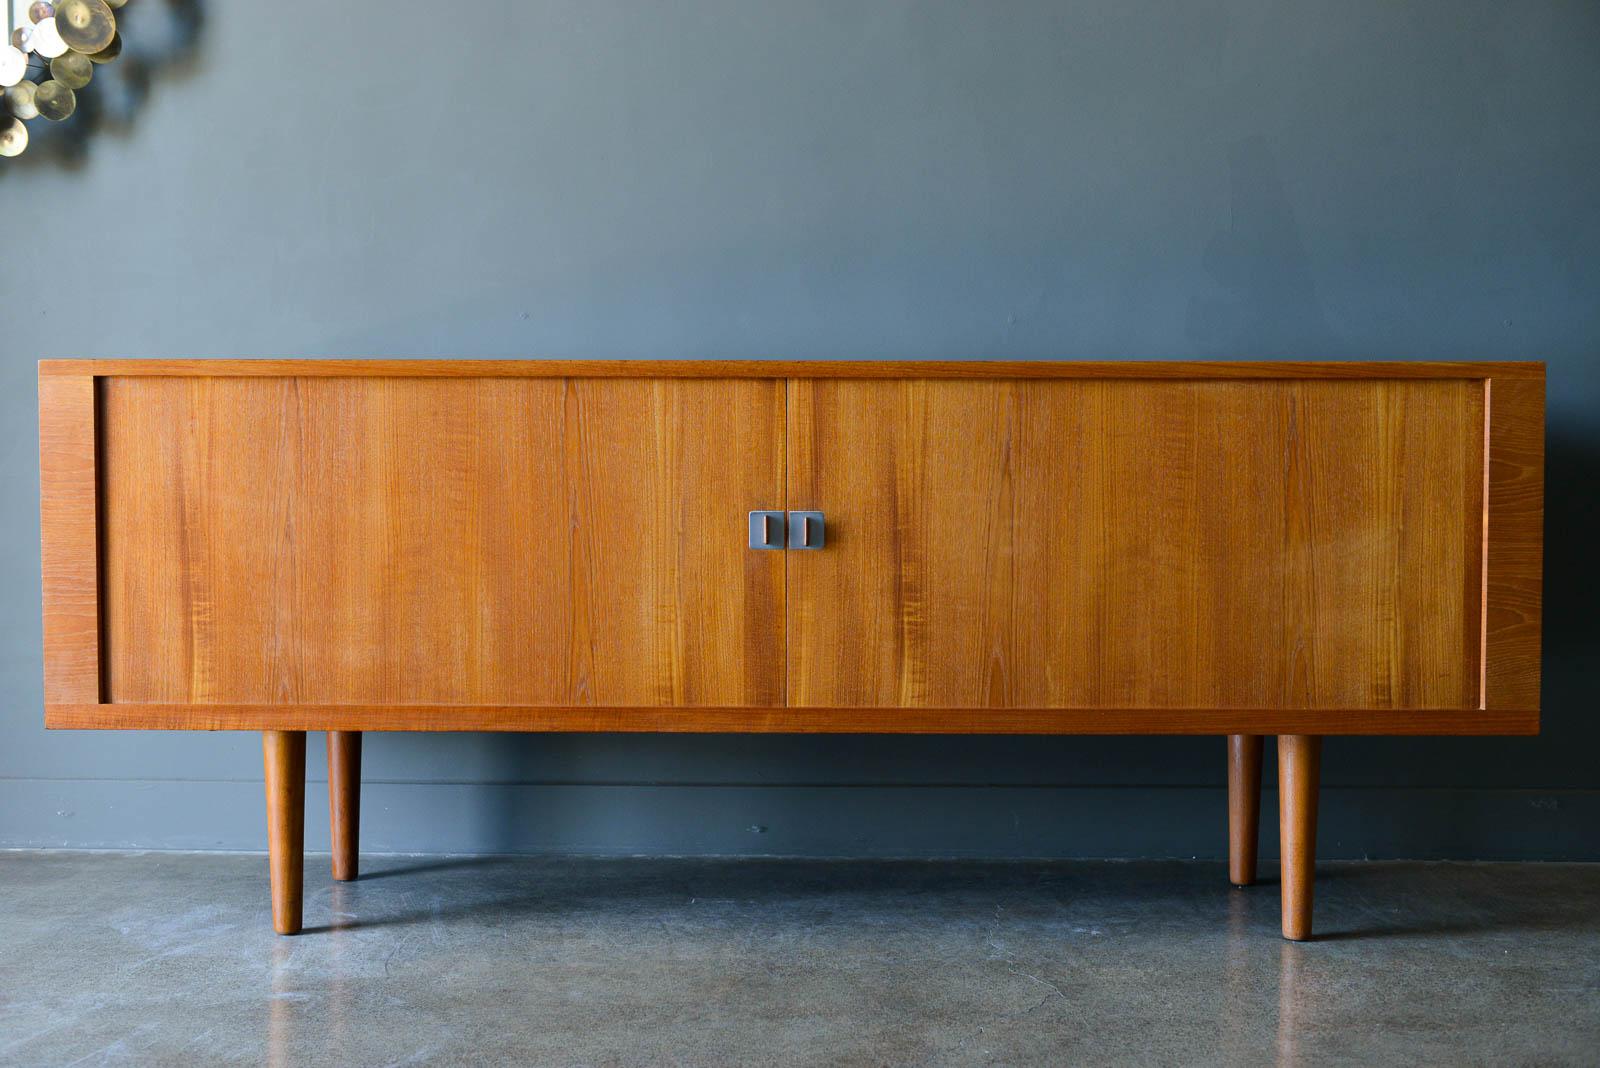 Hans J. Wegner 'President' Tambour door credenza, ca. 1960. Beautiful original condition with only slight wear. Tambour doors glide smoothly with no gaps in the doors. Beautiful adjustable height inside drawers and adjustable side shelving. Credenza